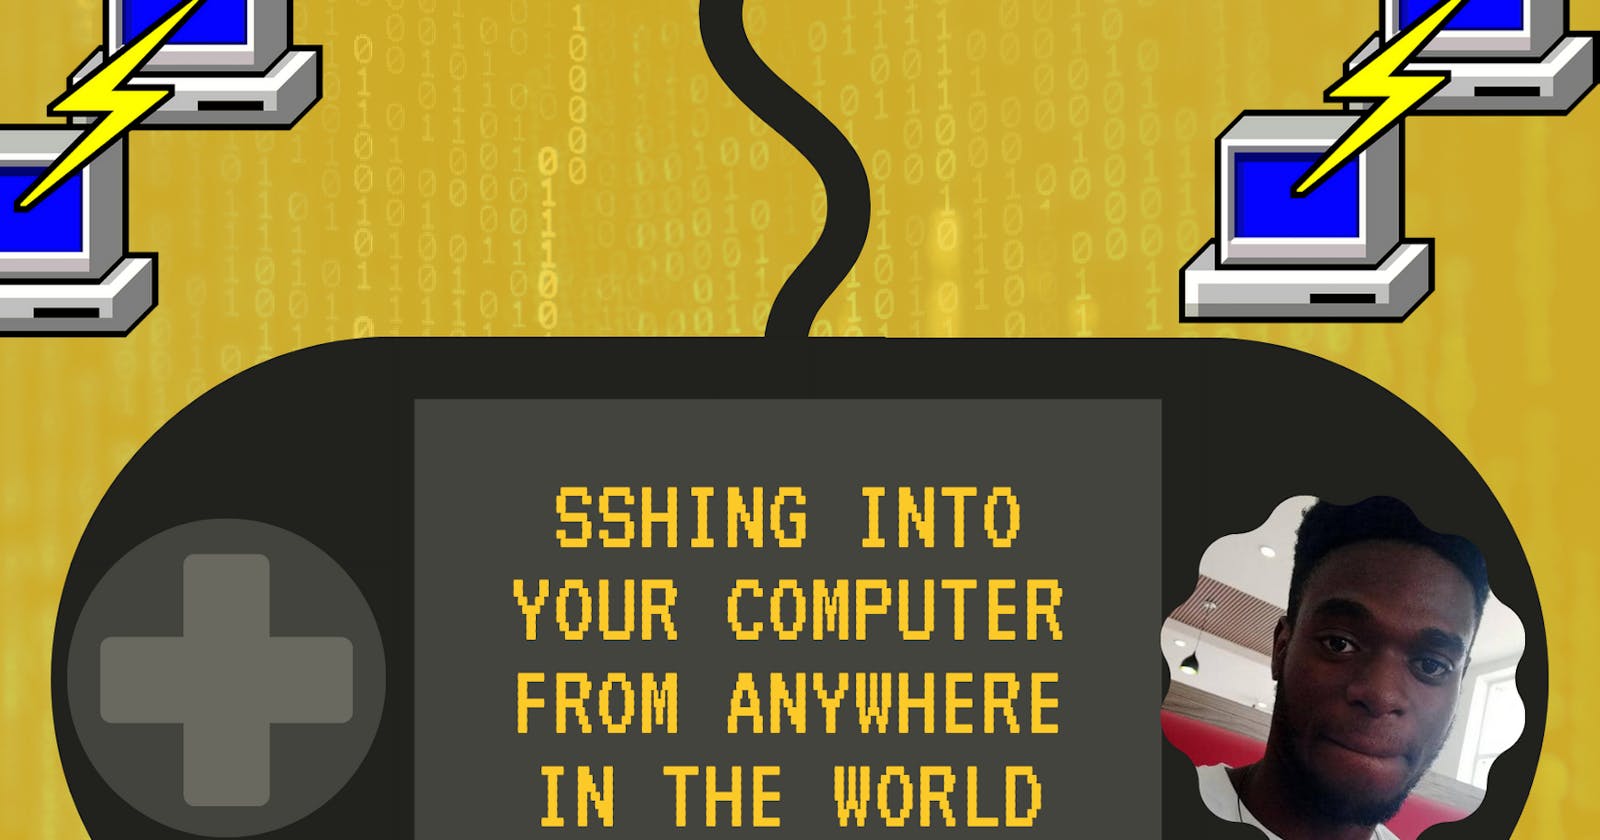 Sshing into your computer from anywhere in the world